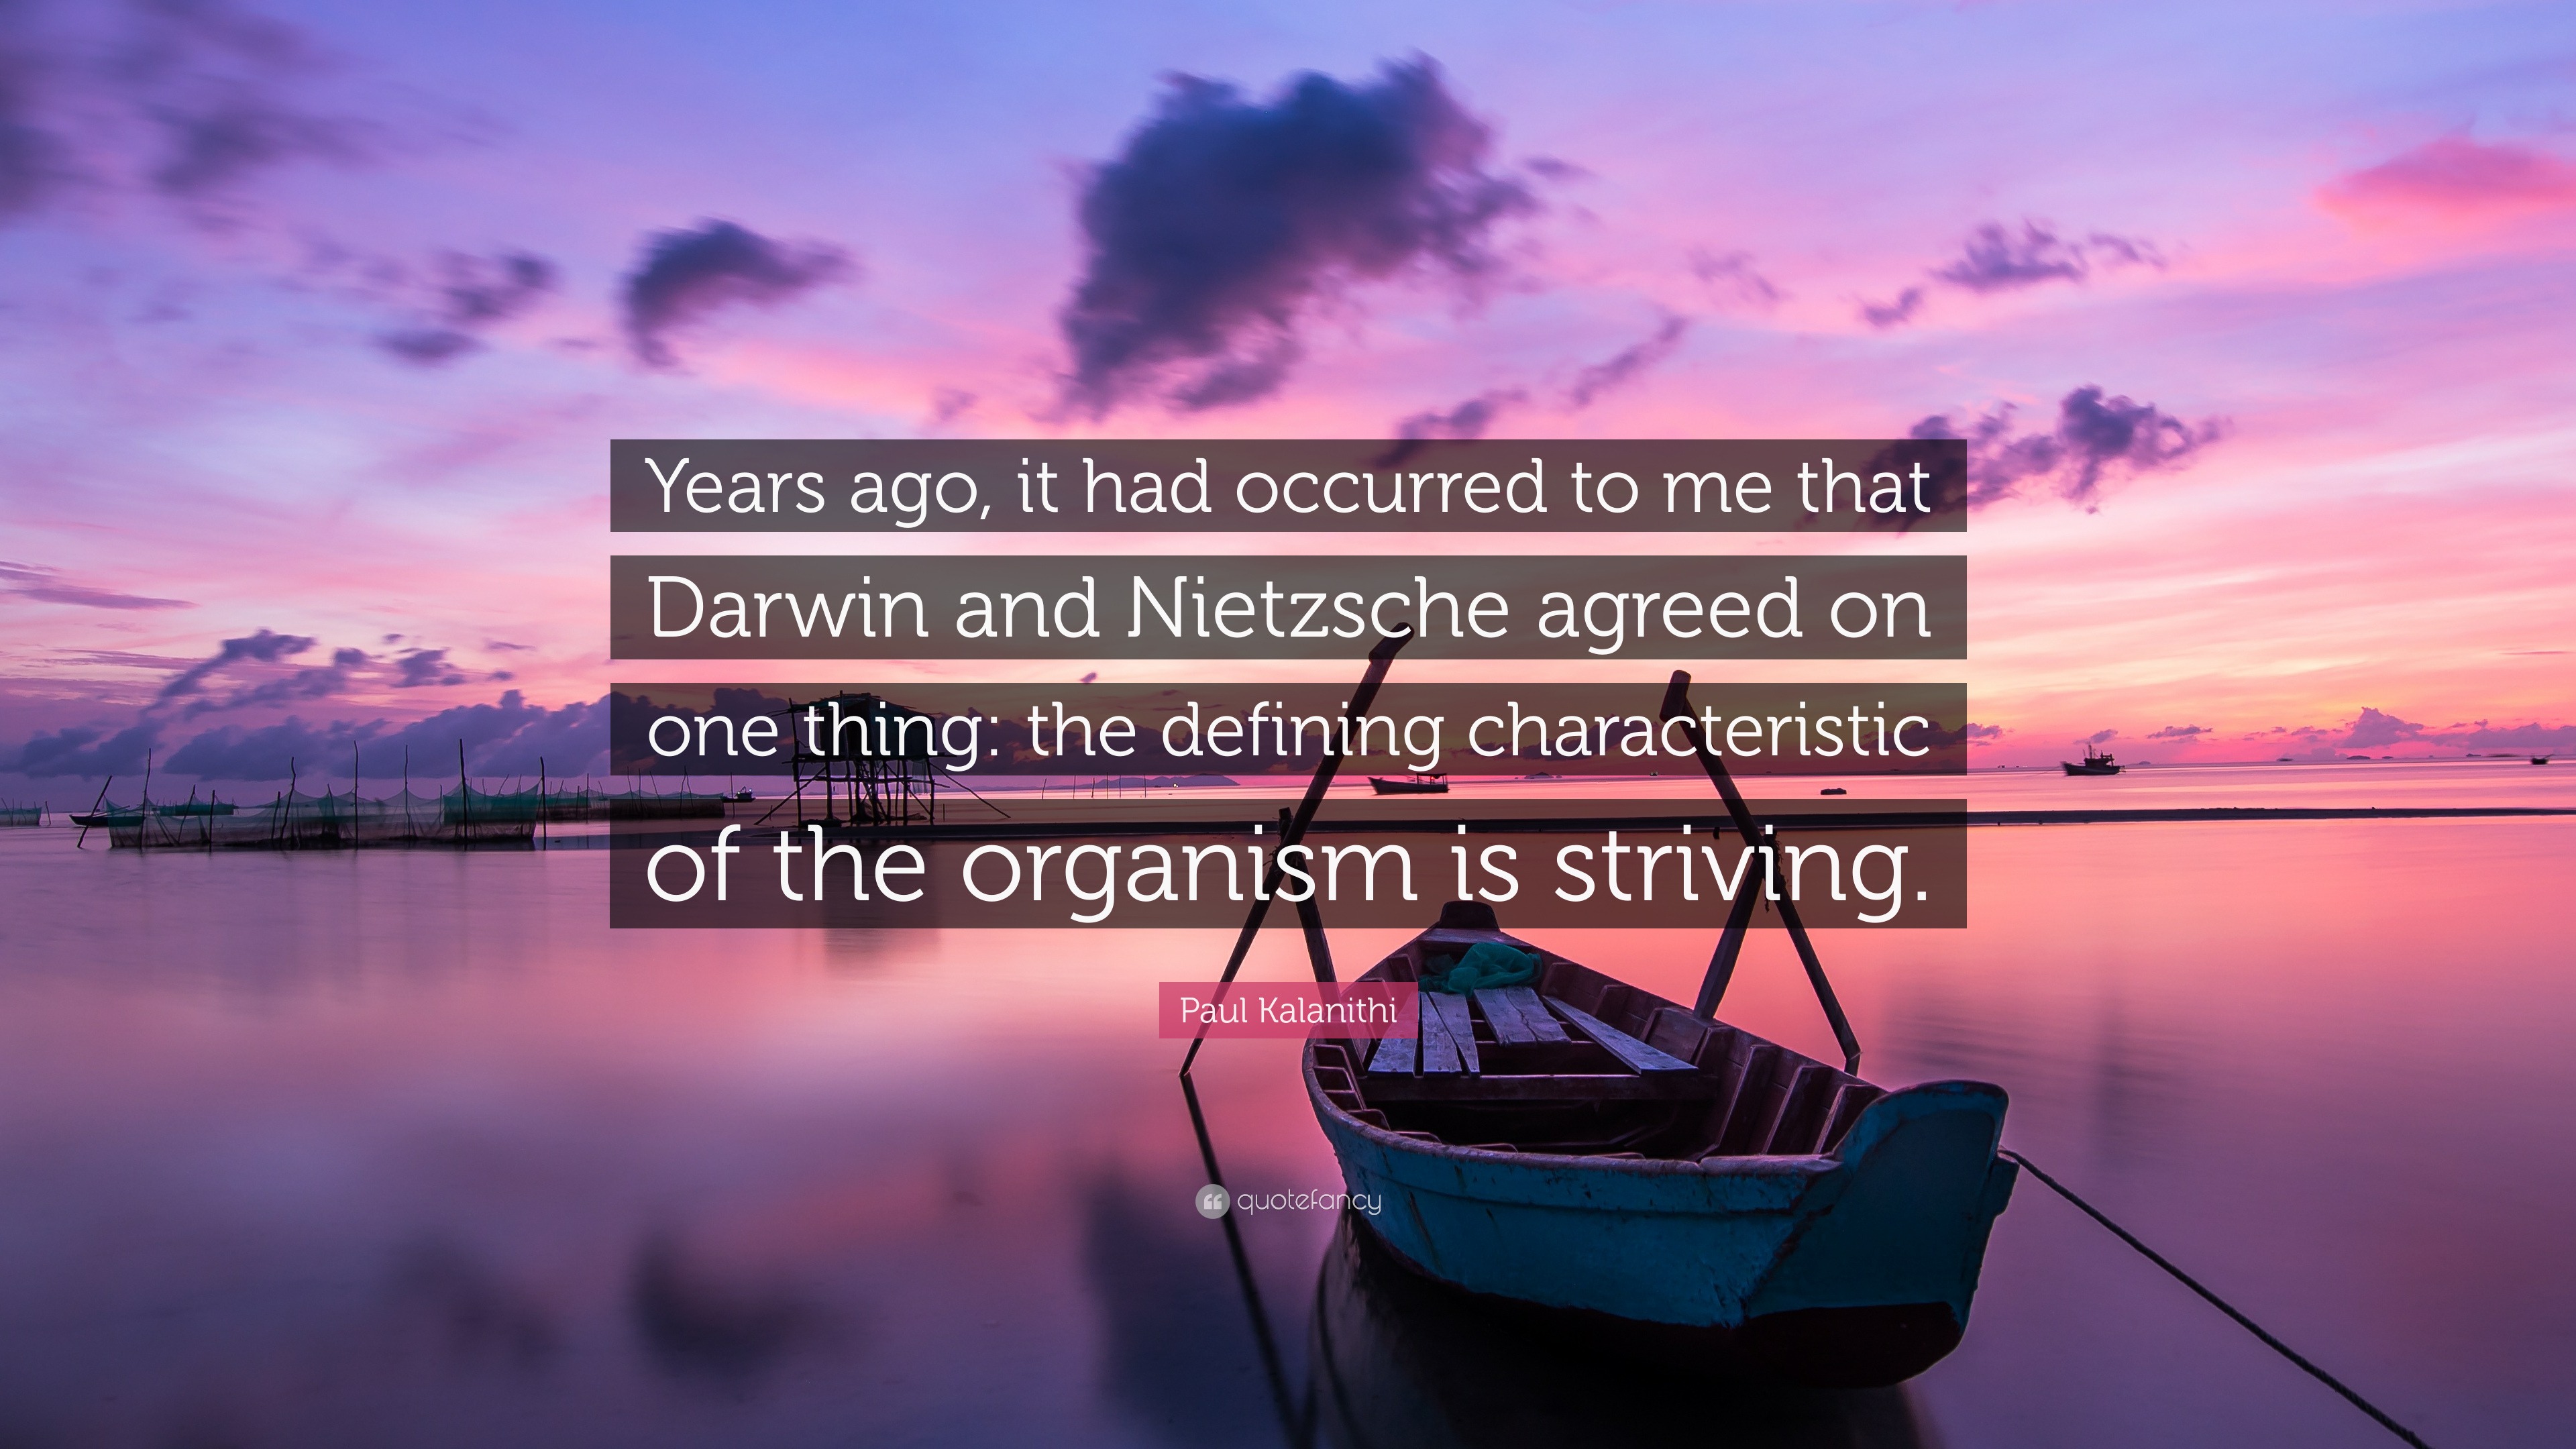 Paul Kalanithi Quote: “Years ago, it had occurred to me that Darwin and